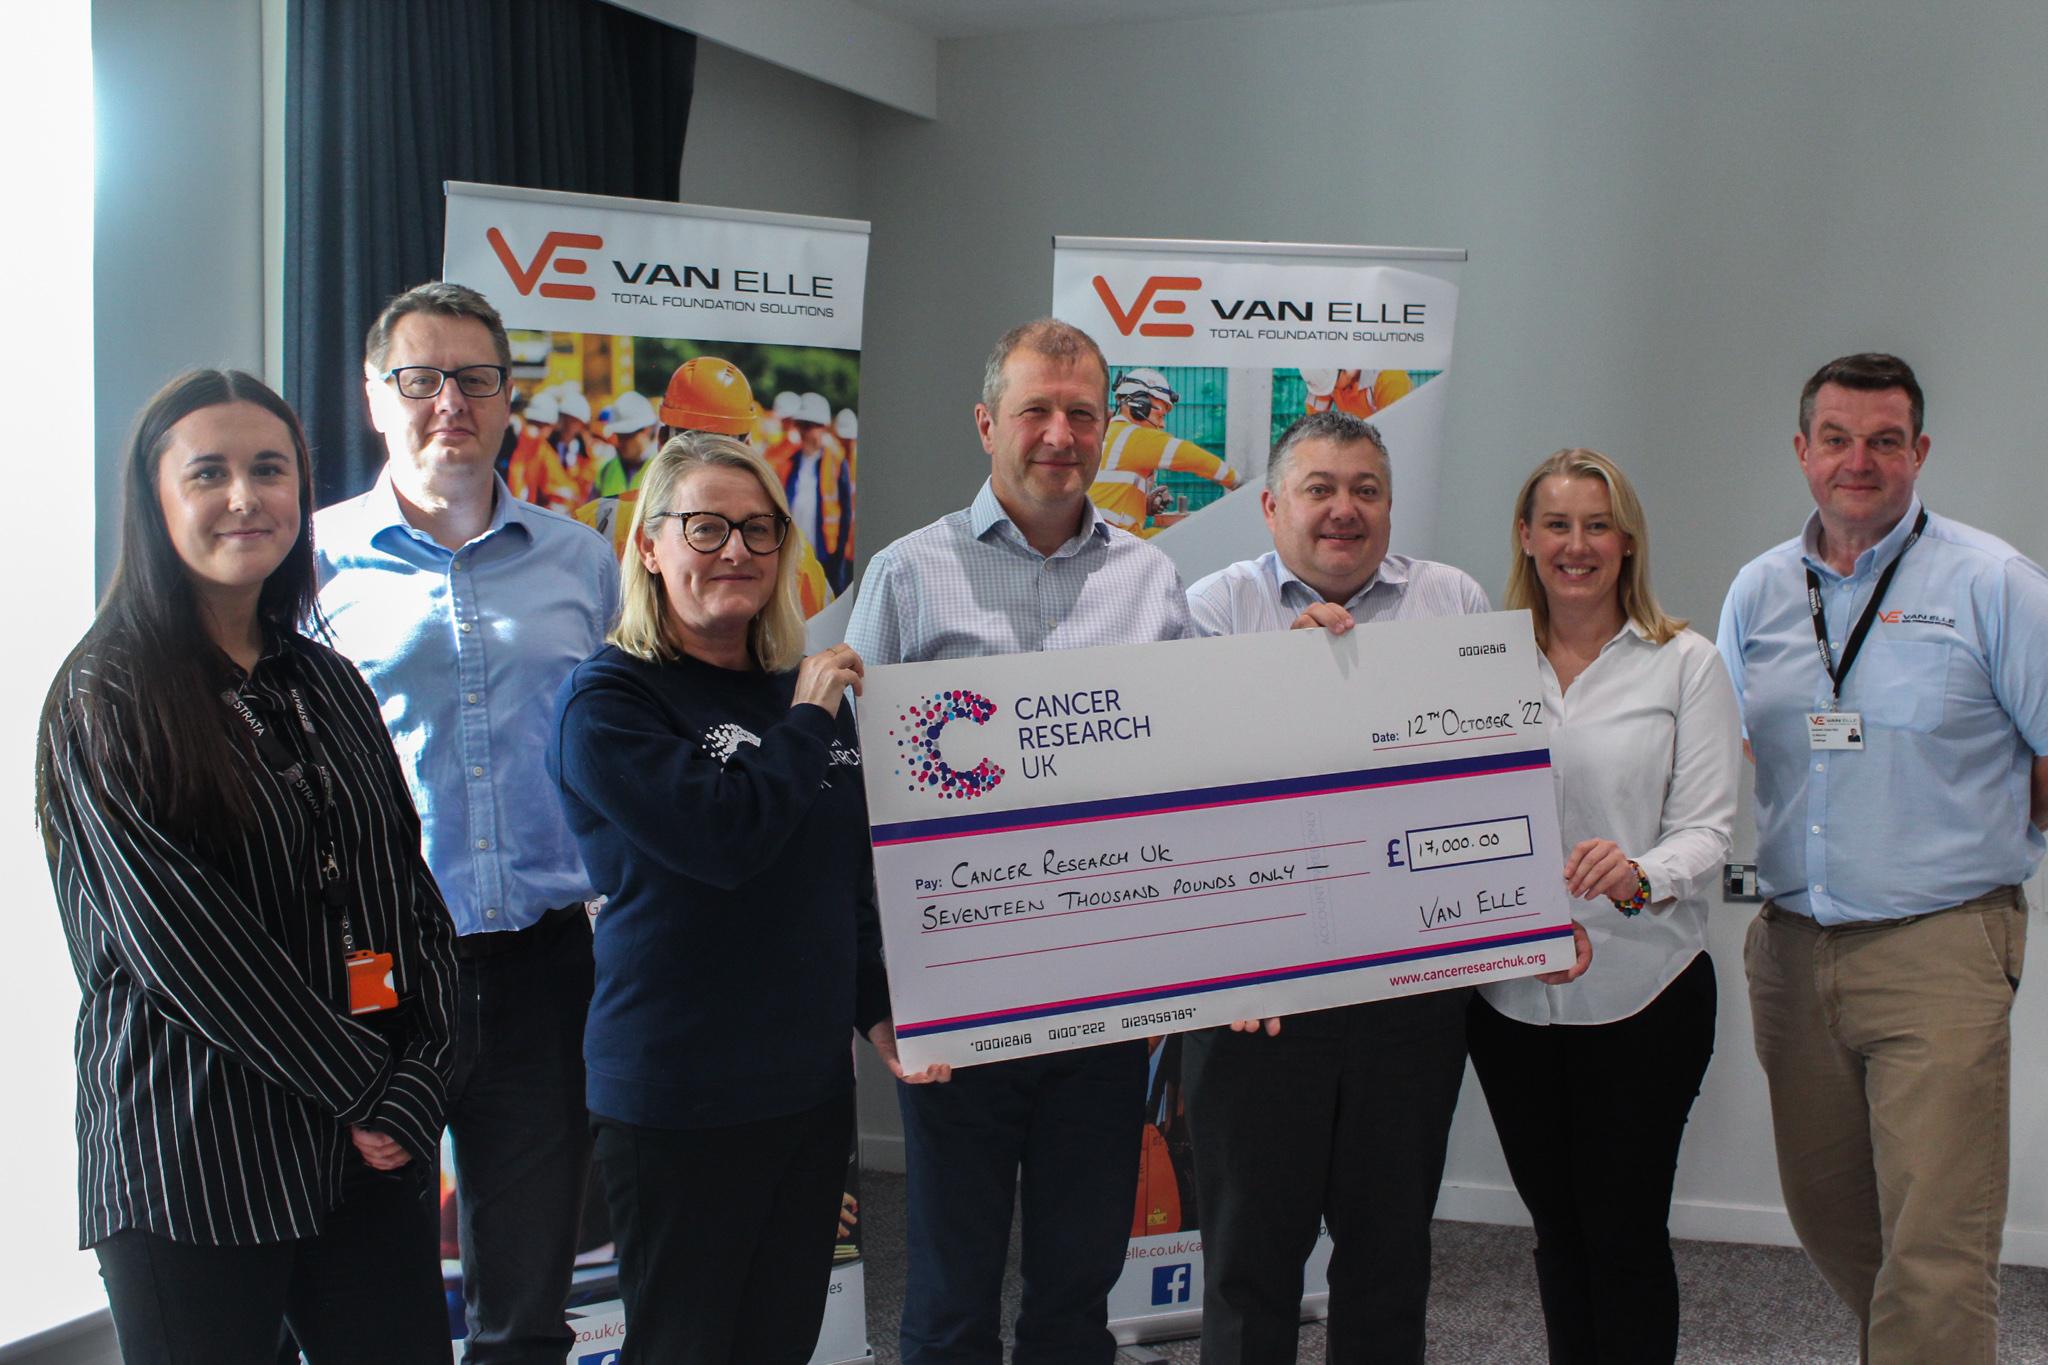 Van Elle donates £17,000 to Cancer Research UK